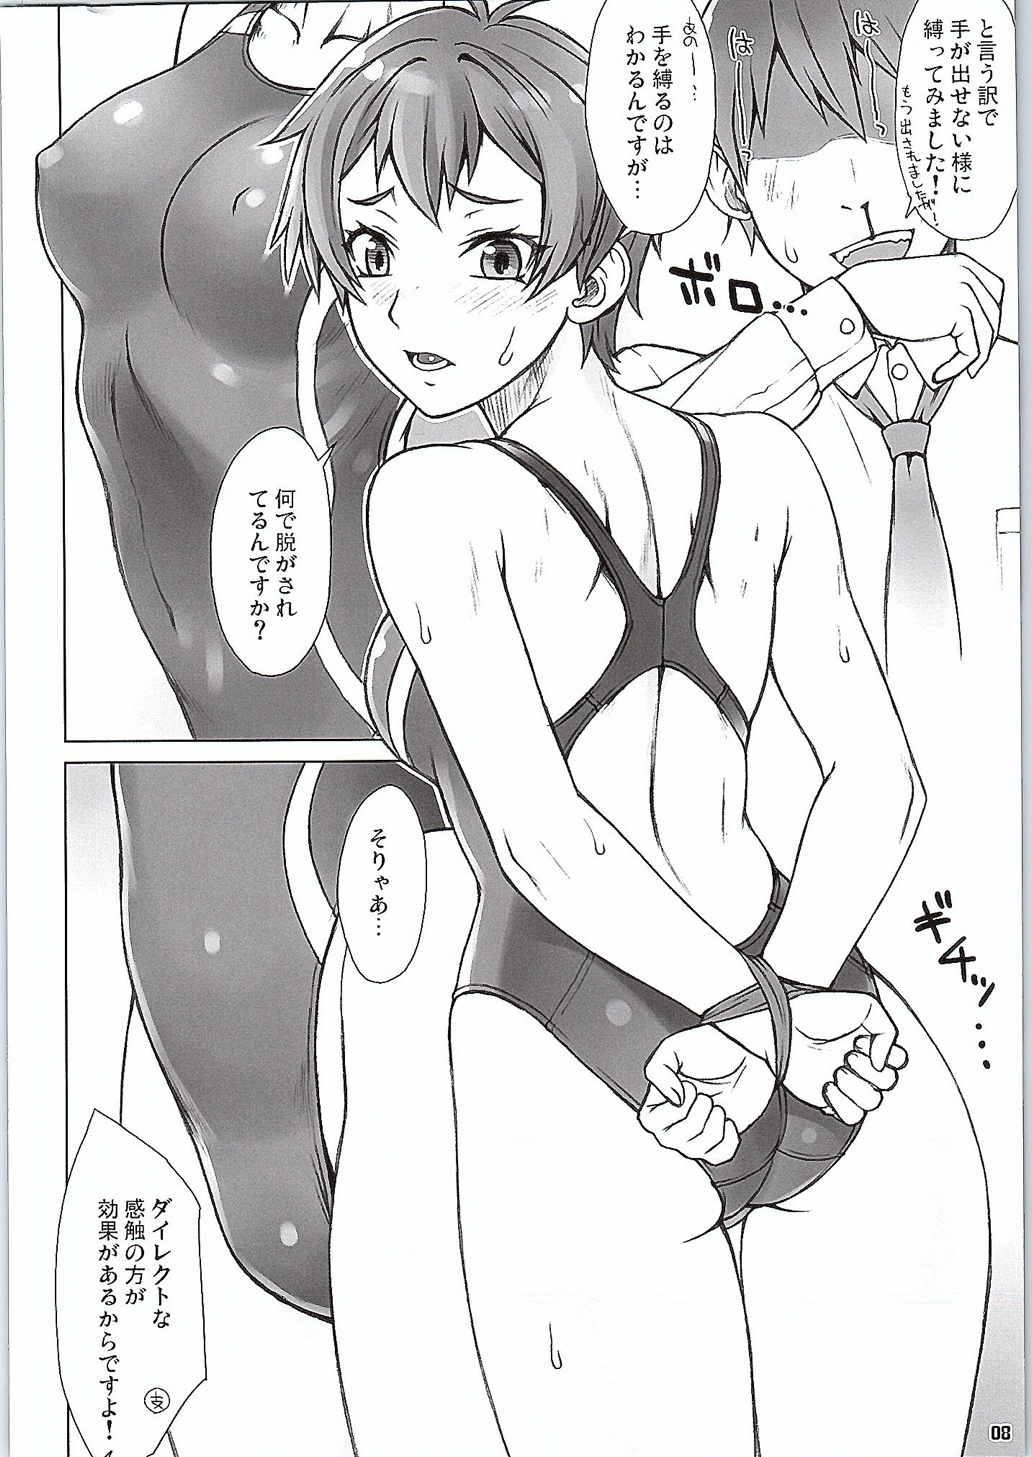 Gaygroup Do! Don't! Touch Me - Tokyo 7th sisters Hardcore Sex - Page 7